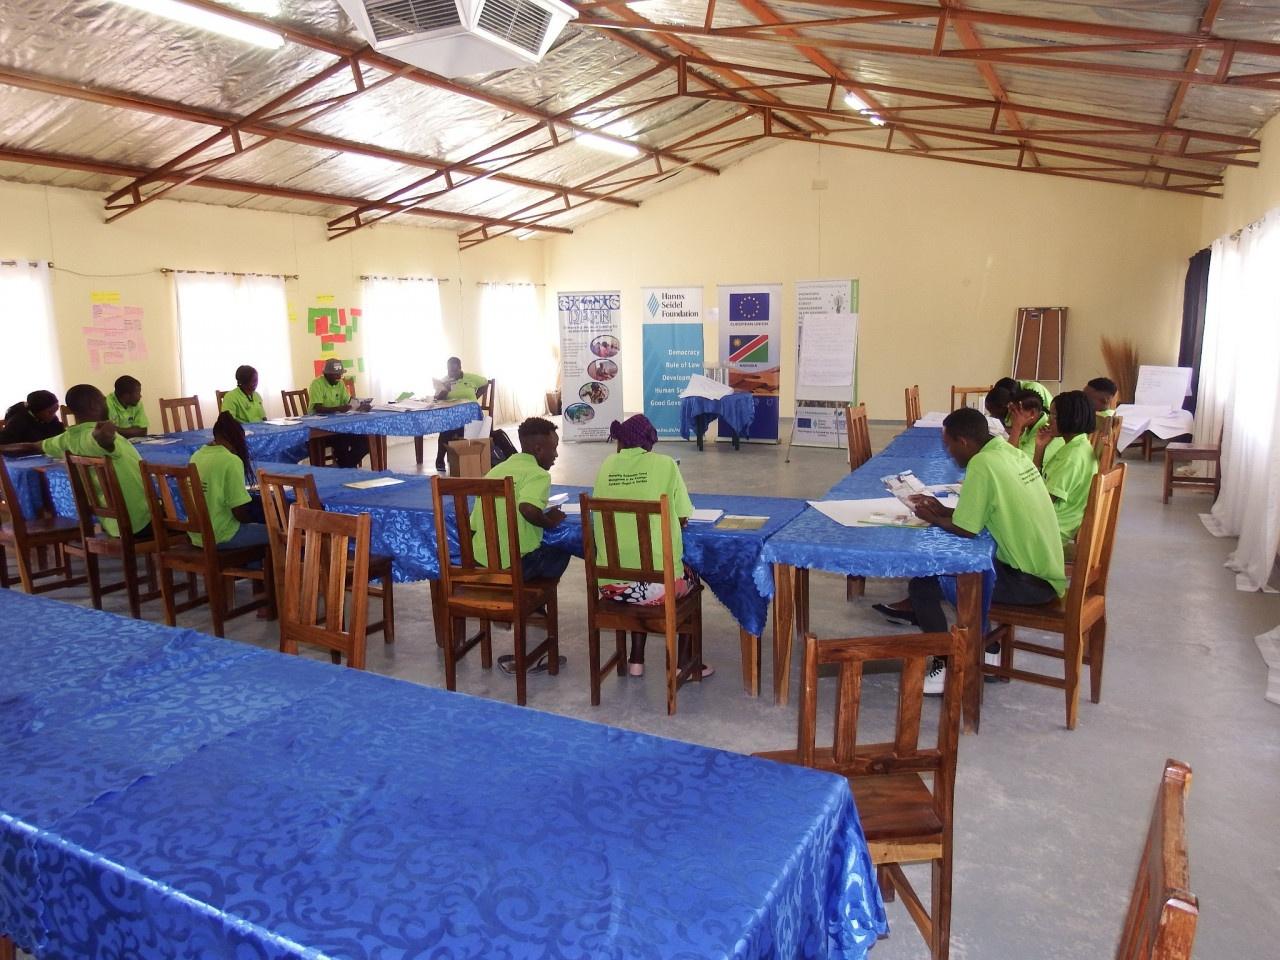 14 Multipliers from Kavango West Region Trained on Sustainable Forest Management